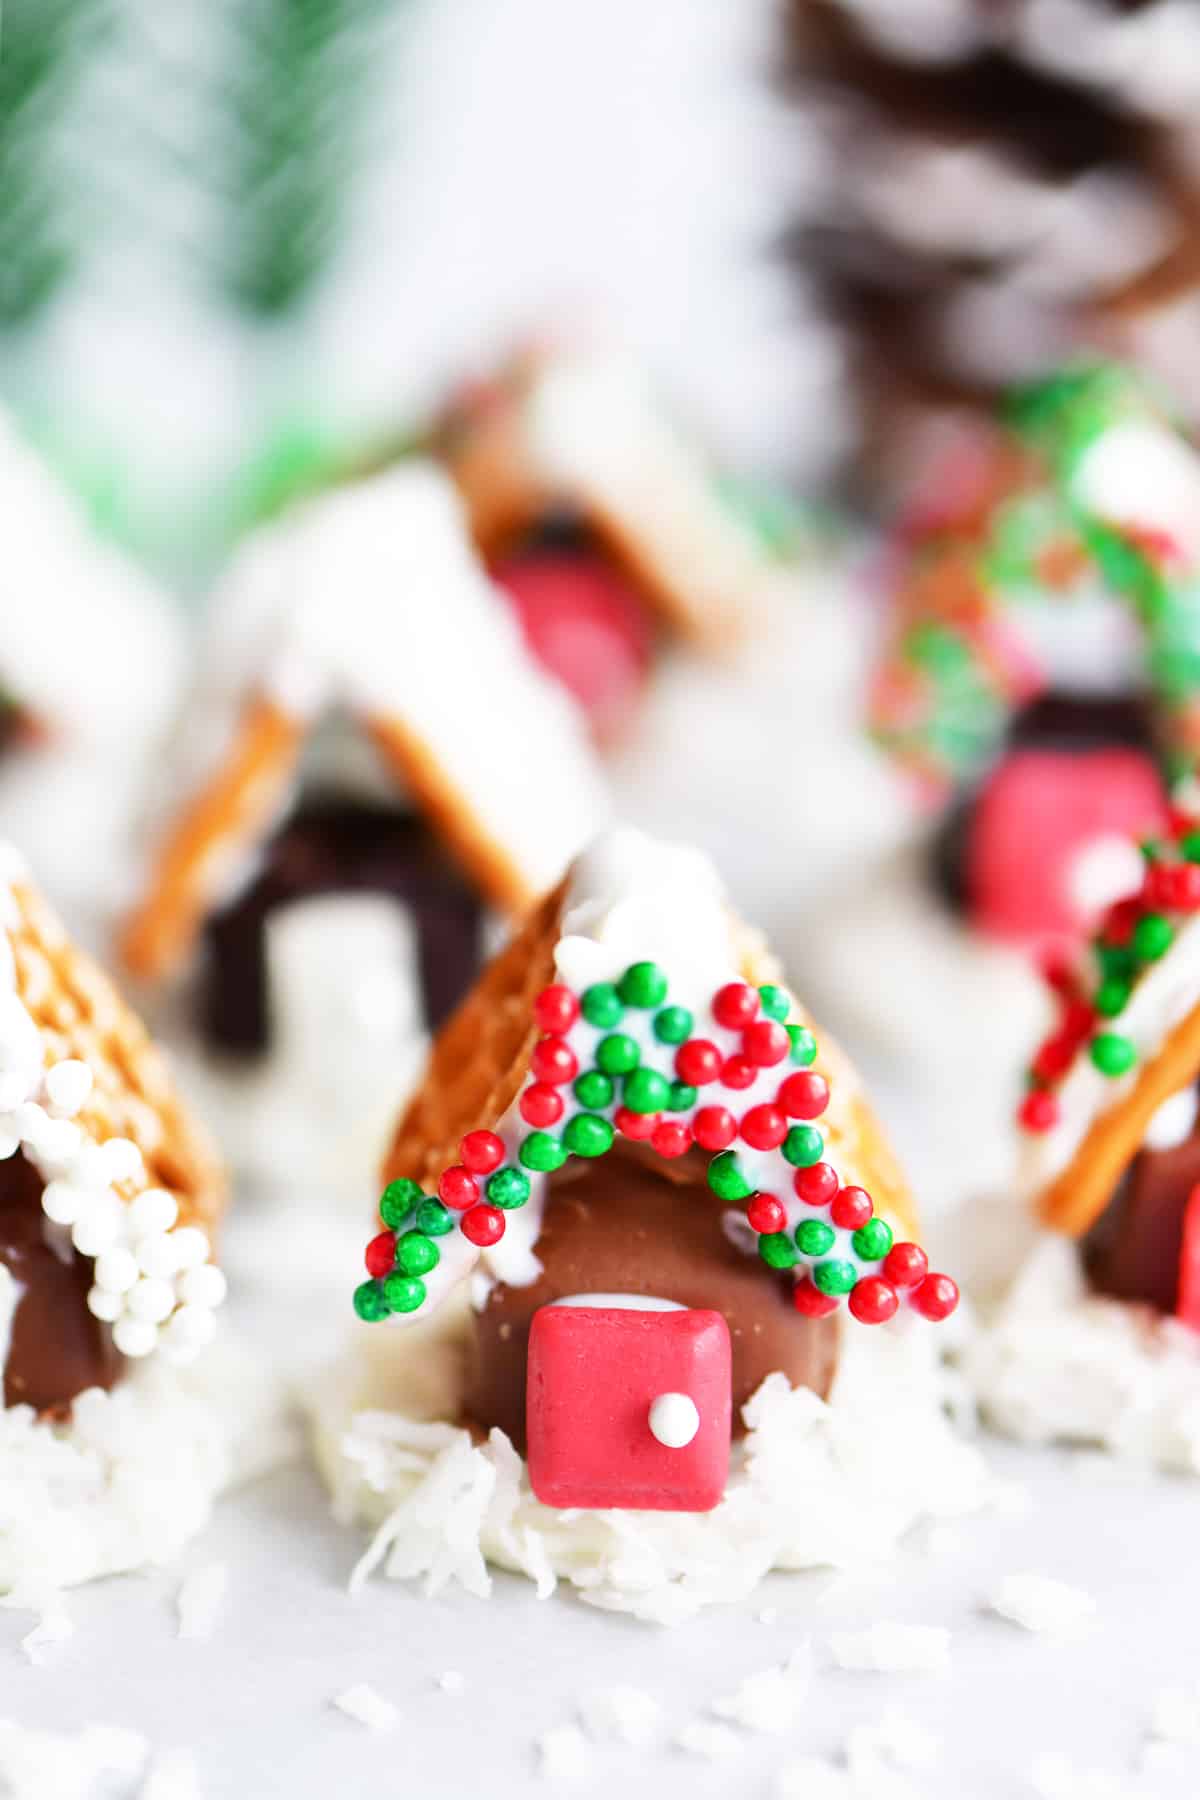 mini candy houses made with pretzels